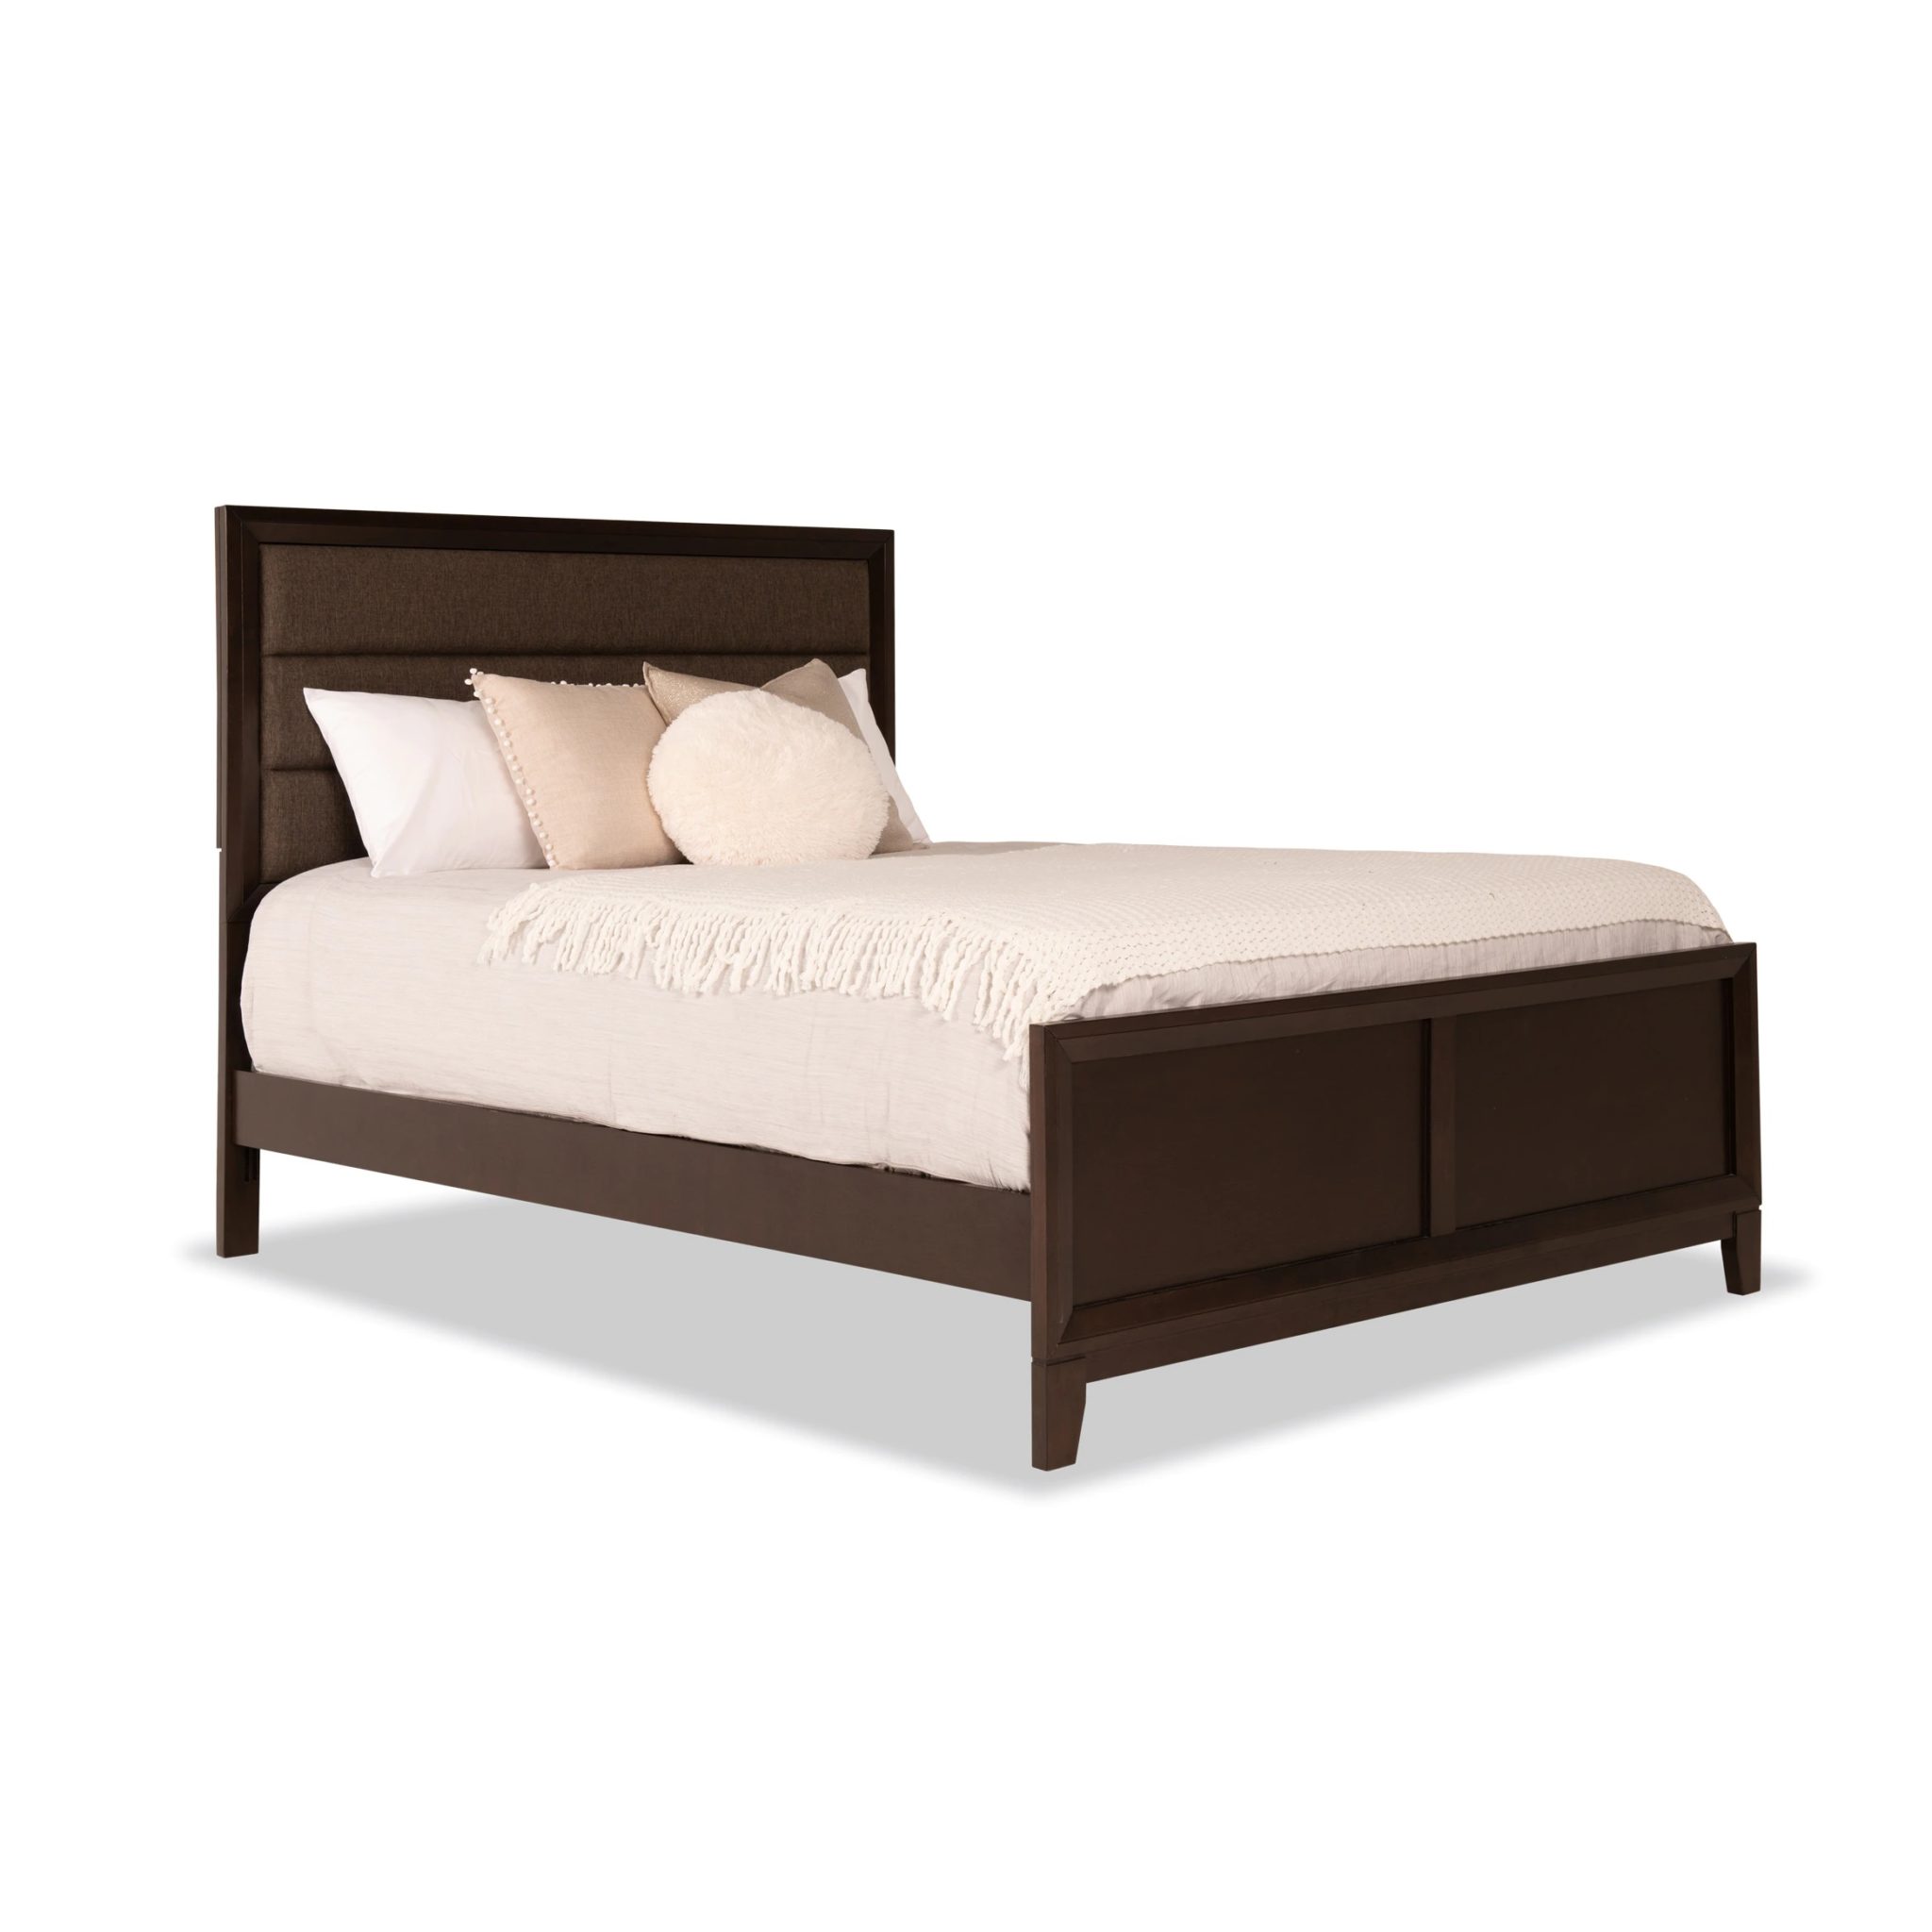 Bobs Furniture Review 4 2048x2048 